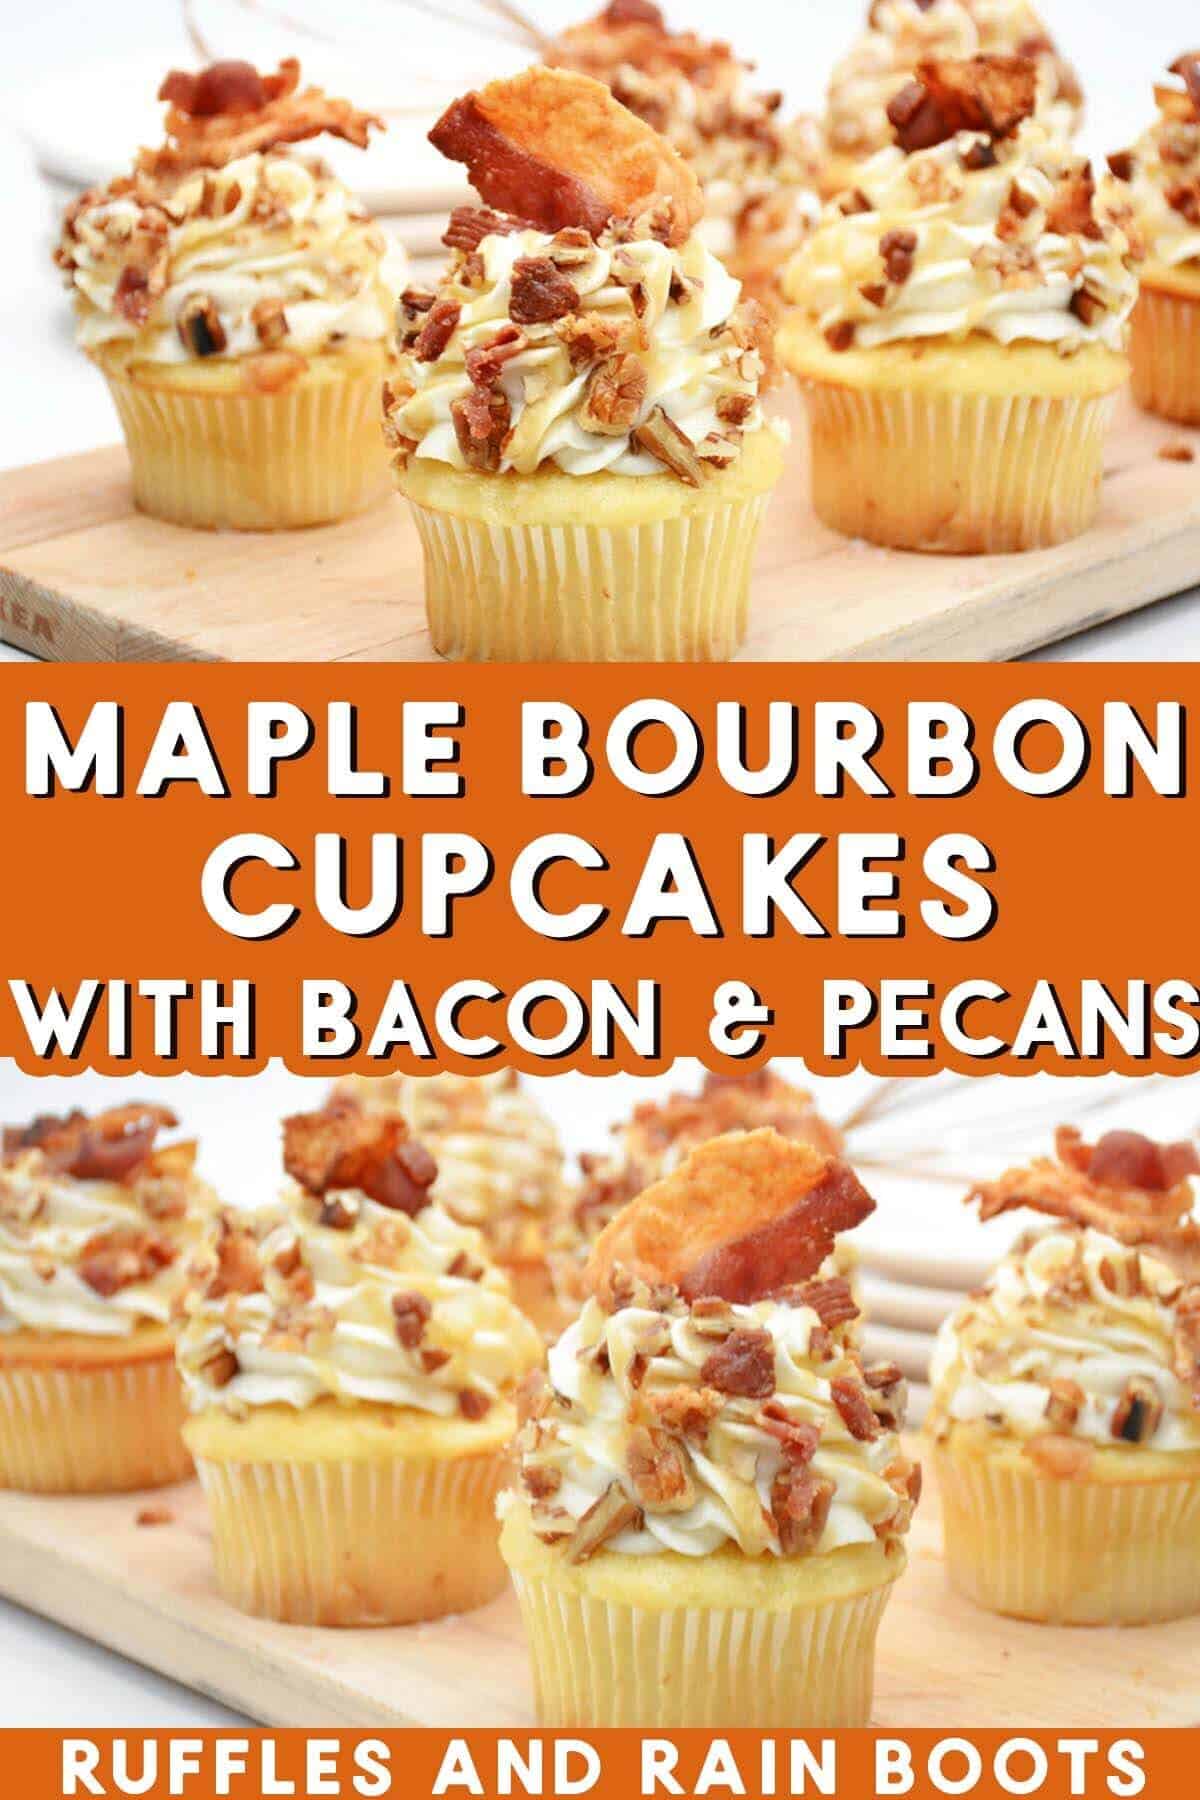 Stacked vertical image of delicious and savory cupcakes on a wood cutting board with text which reads maple bourbon cupcakes with bacon and pecans.